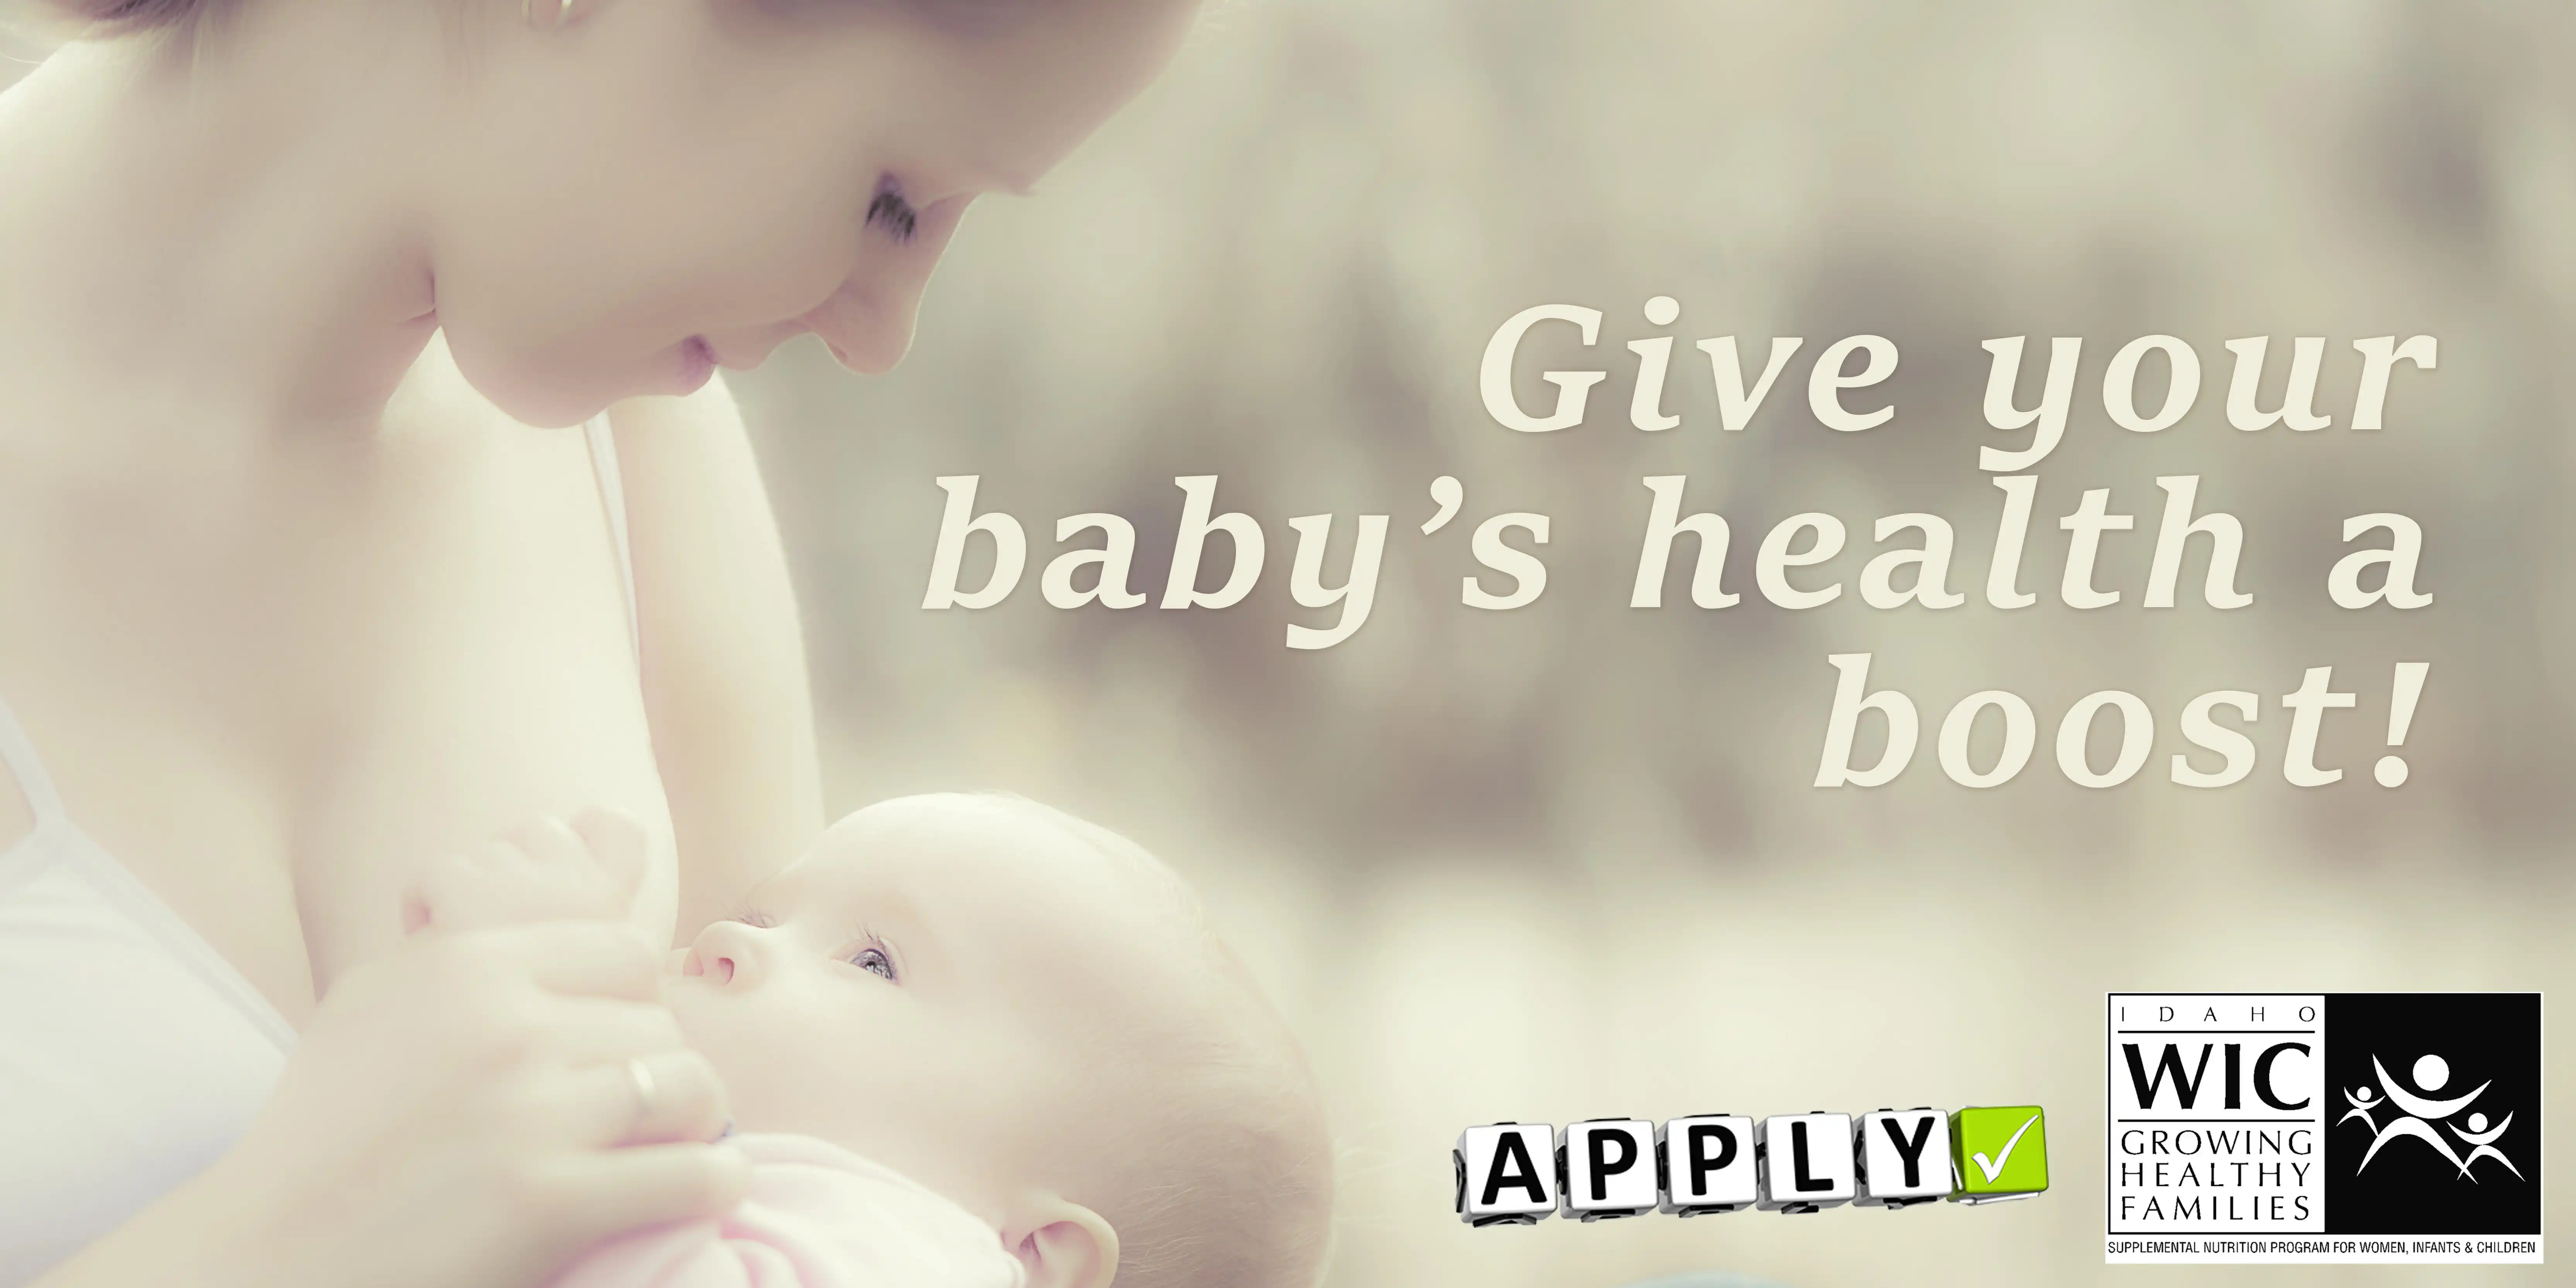 Give your baby's health a boost!